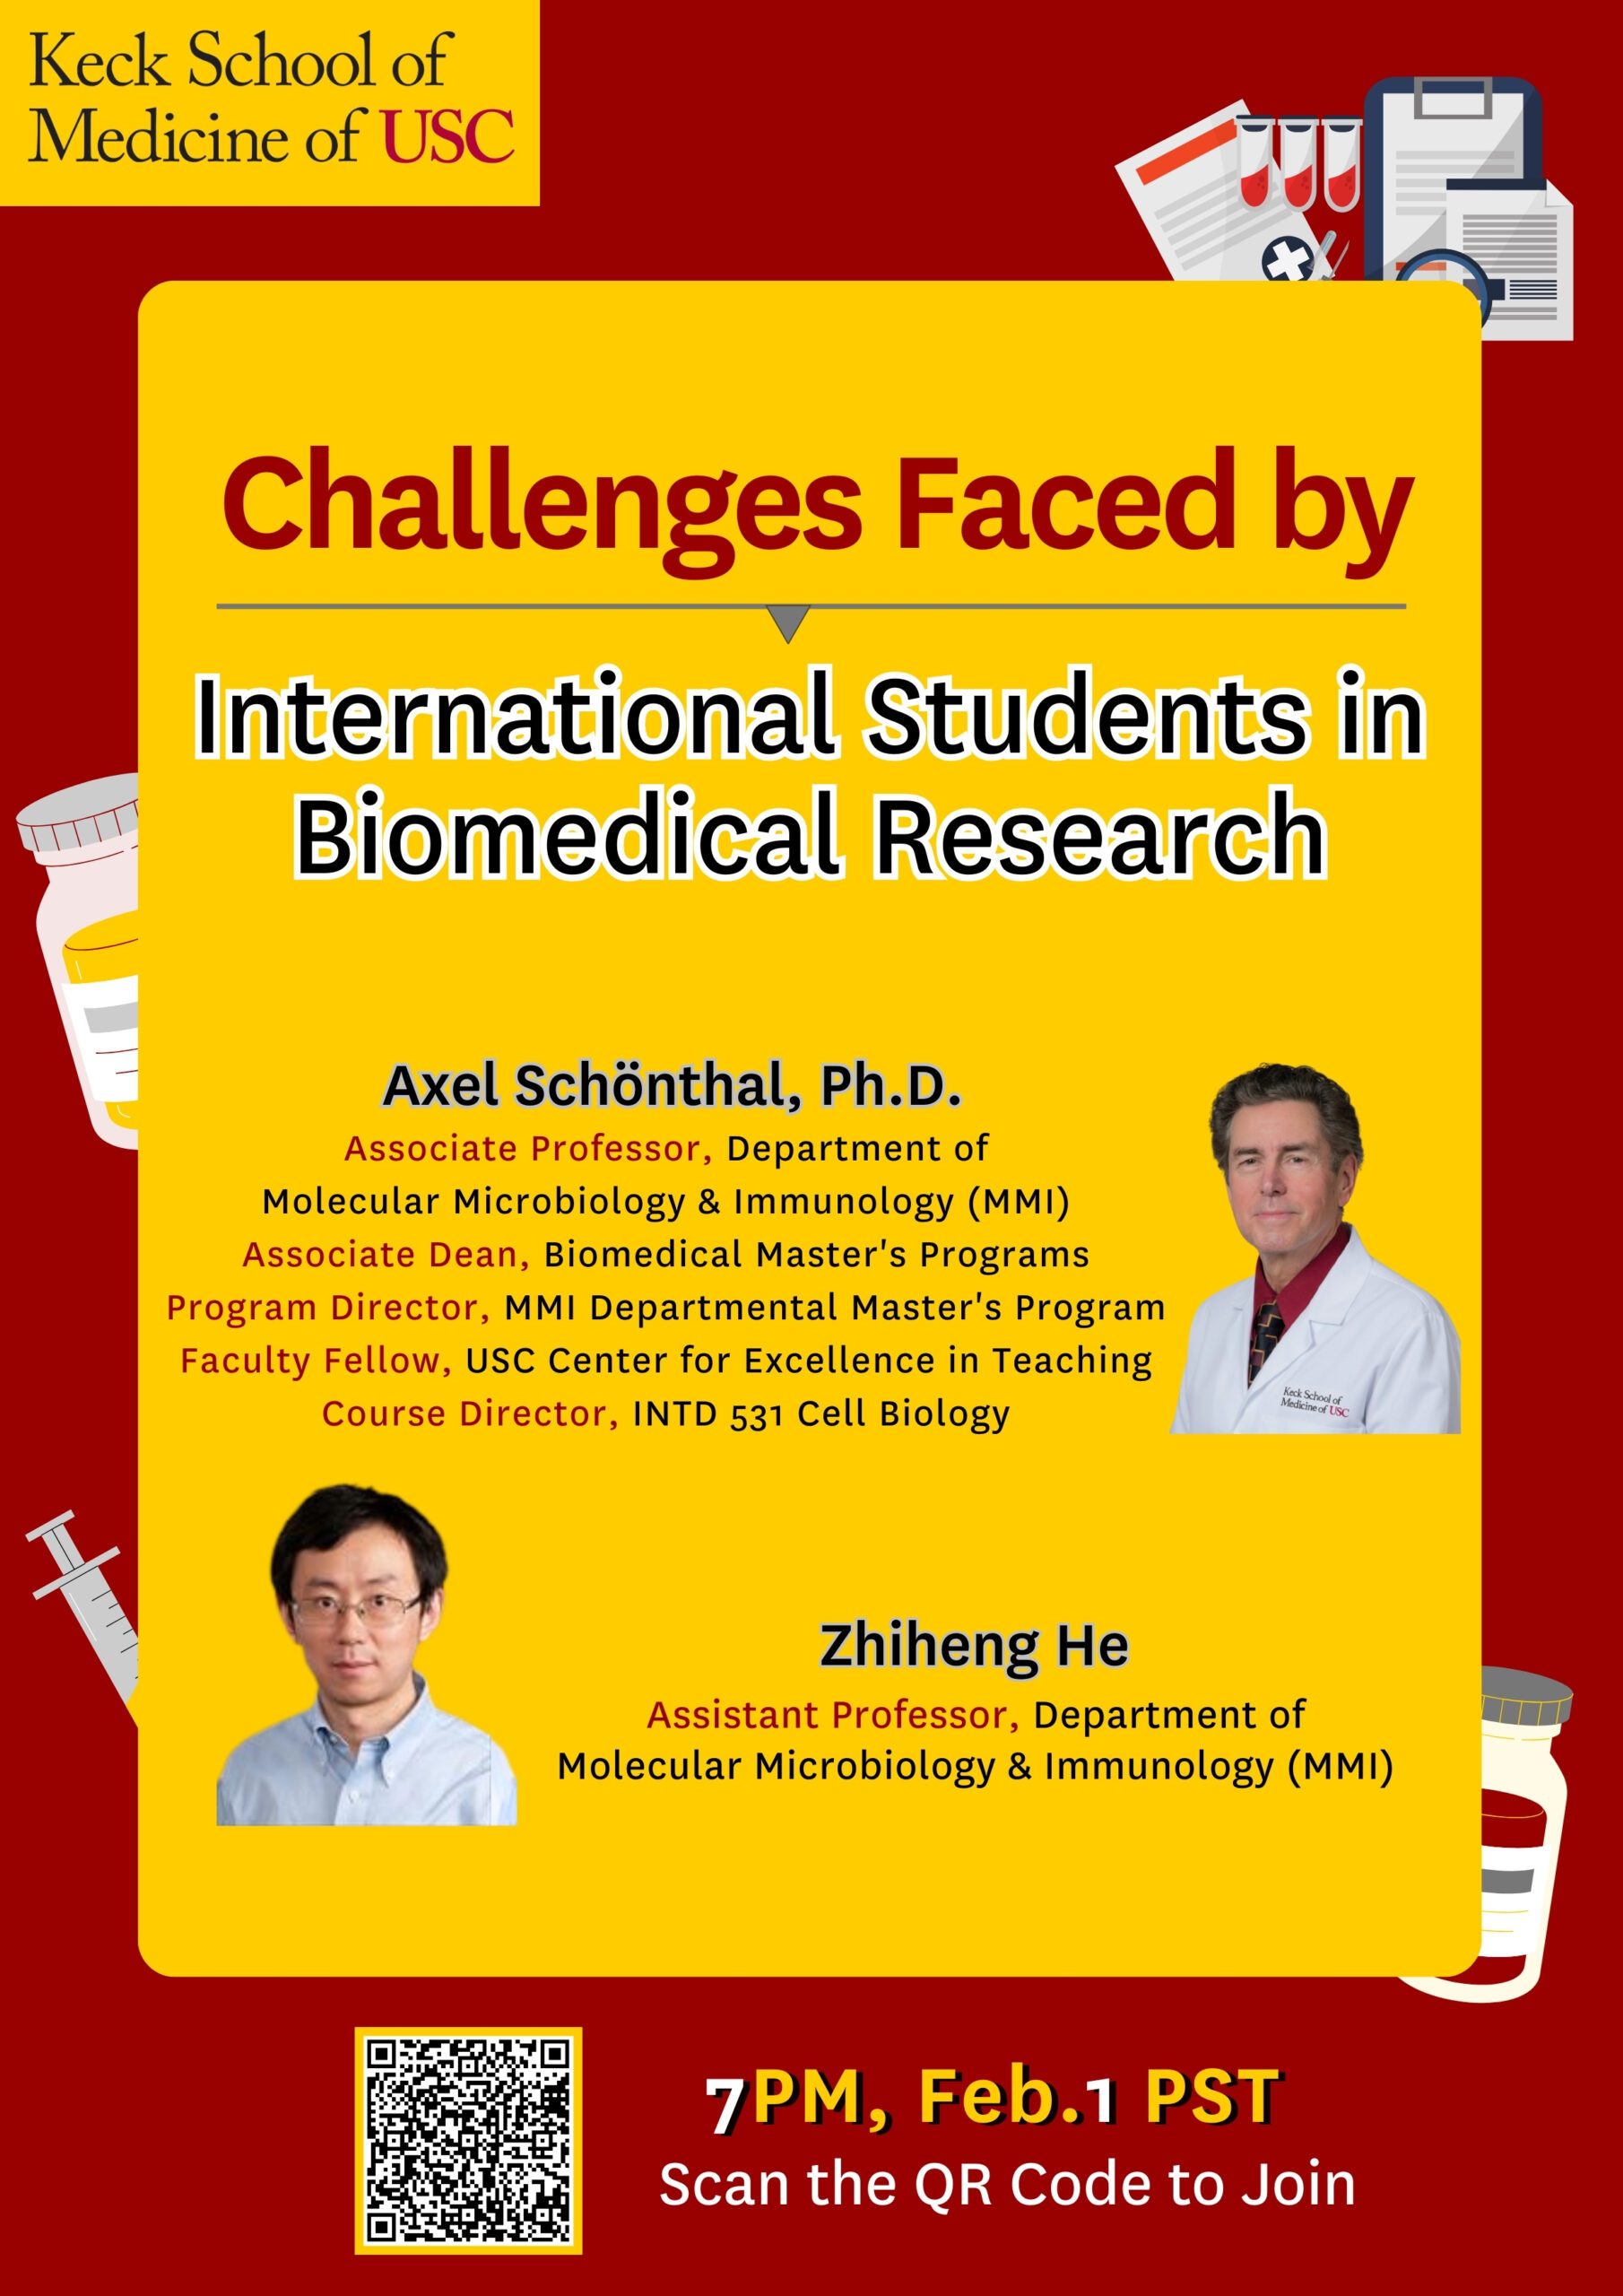 Challenges Faced by International Students in Biomedical Research